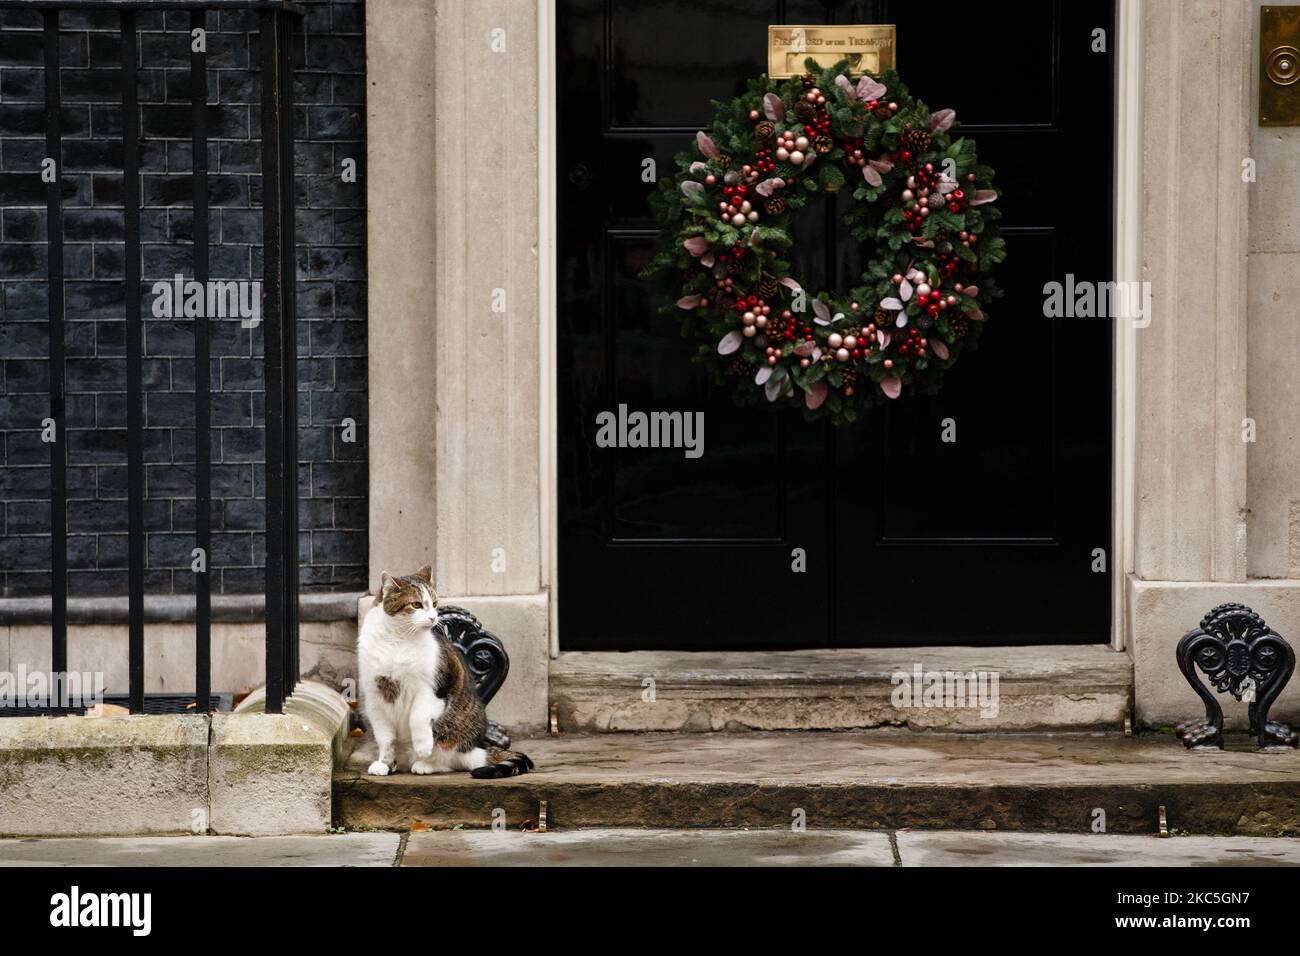 Resident cat Larry sits outside the door of 10 Downing Street, currently adorned with a Christmas wreath for the festive season, in London, England, on December 9, 2020. (Photo by David Cliff/NurPhoto) Stock Photo